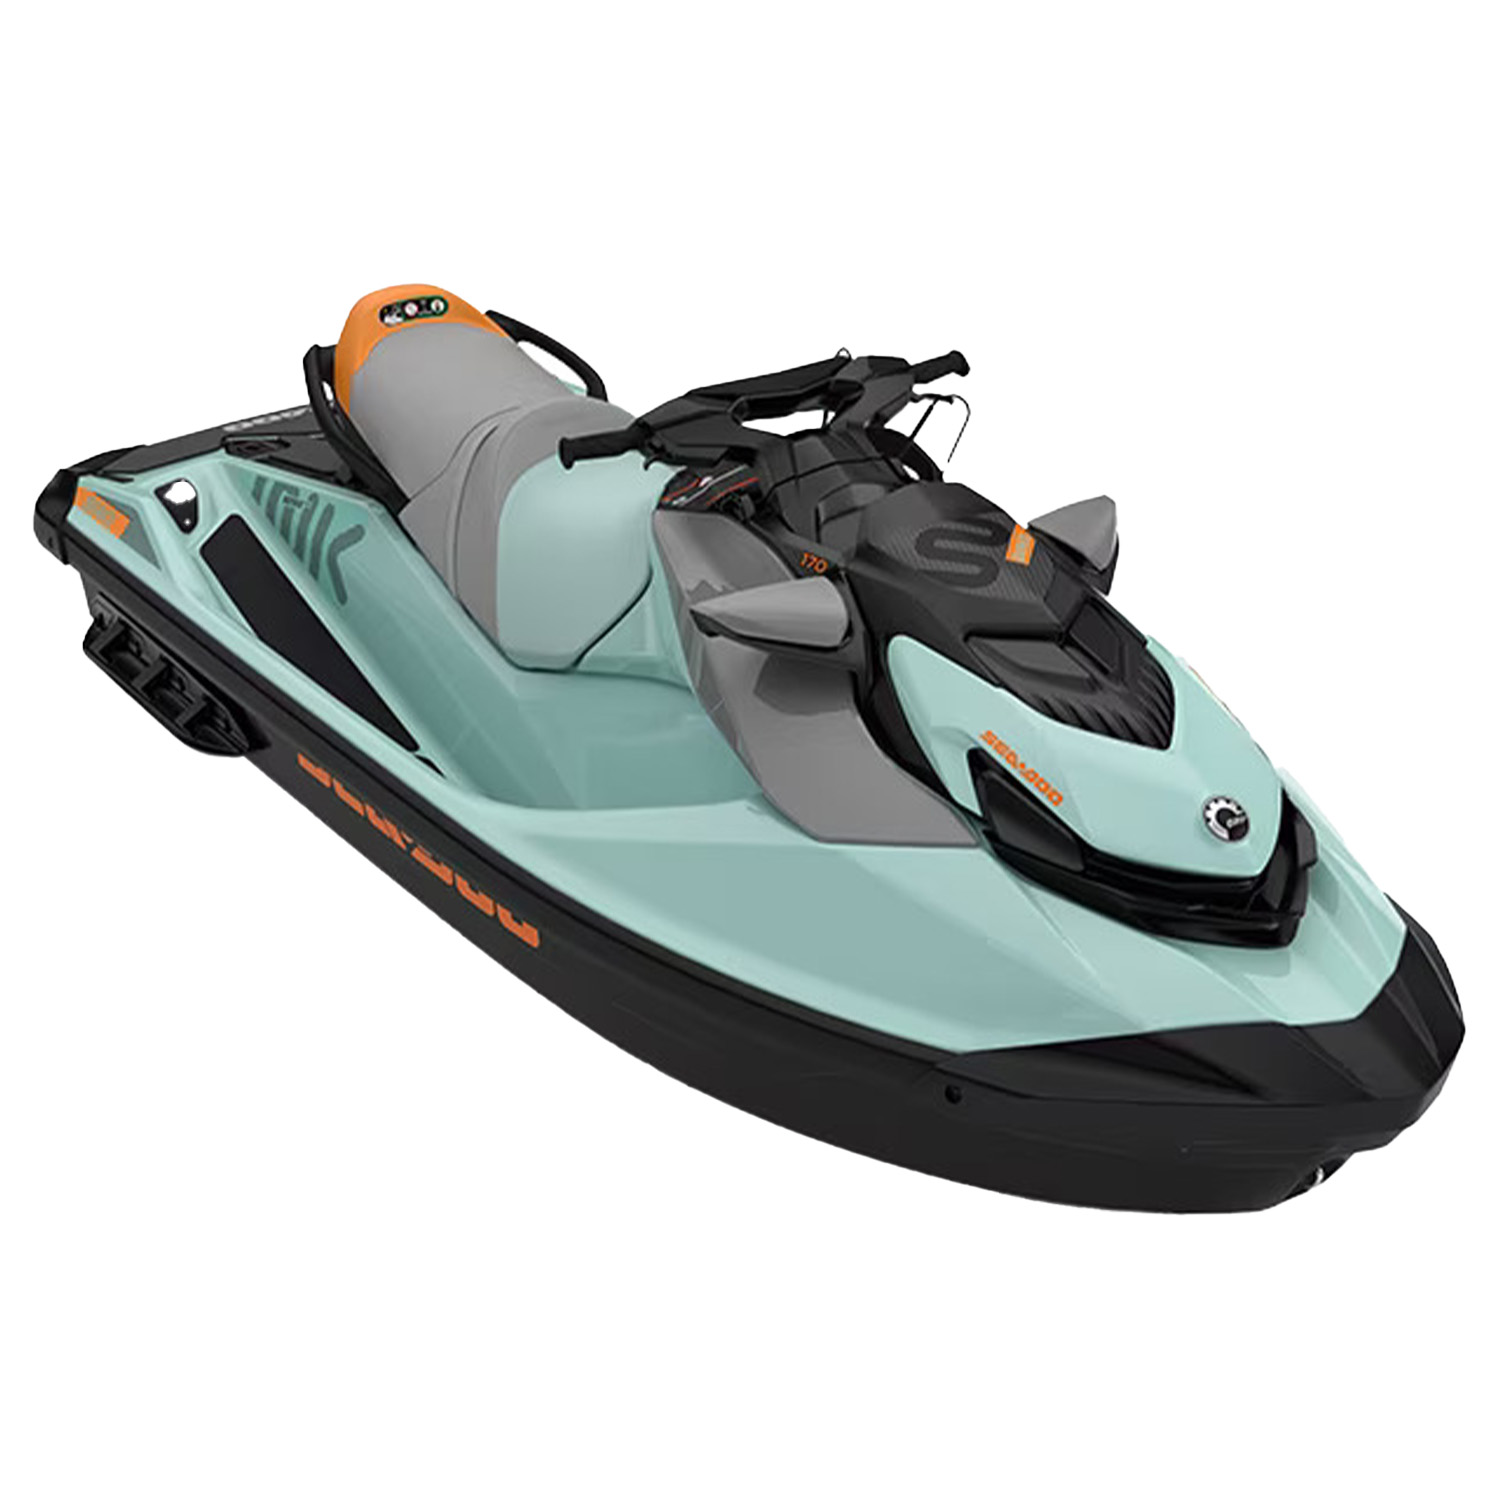 example photo of tow sports watercraft